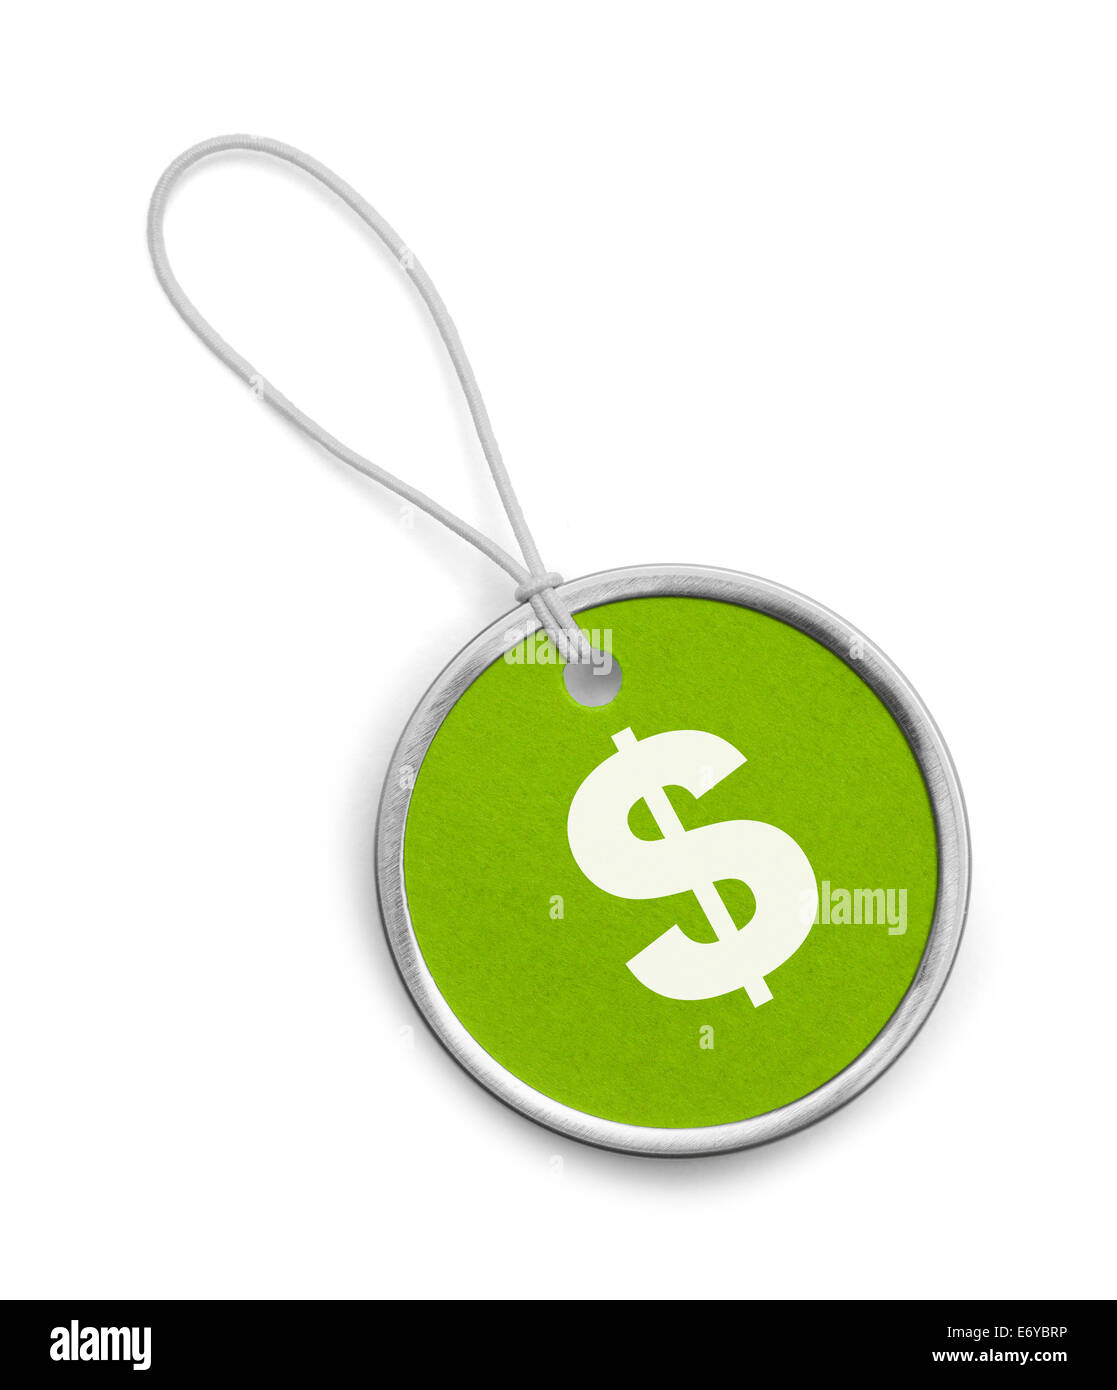 Round Green Money Tag Isolated on White Background. Stock Photo